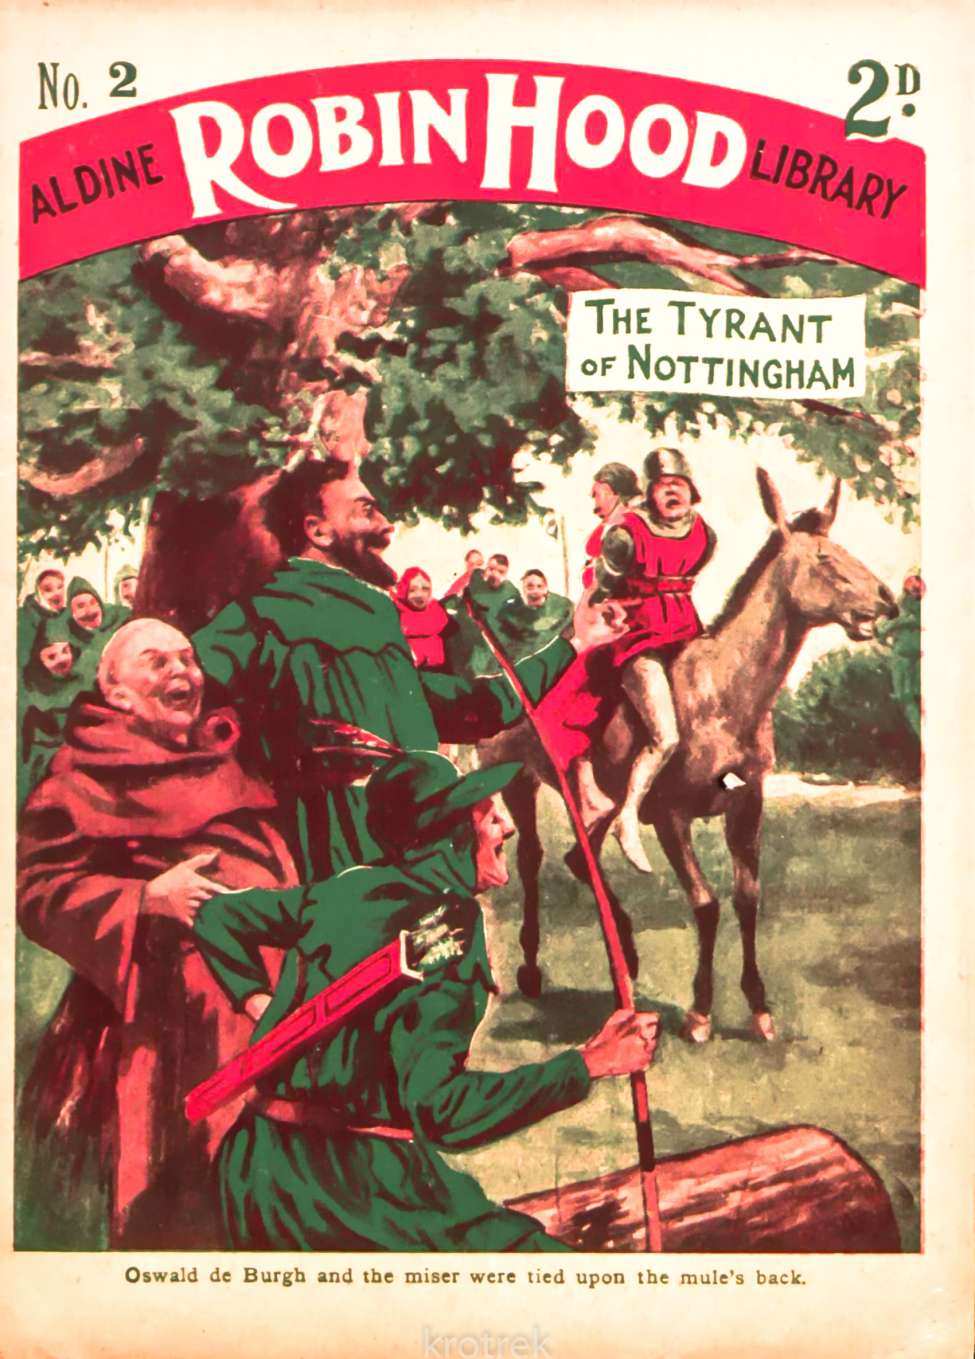 Book Cover For Aldine Robin Hood Library 2 - The Tyrant of Nottingham